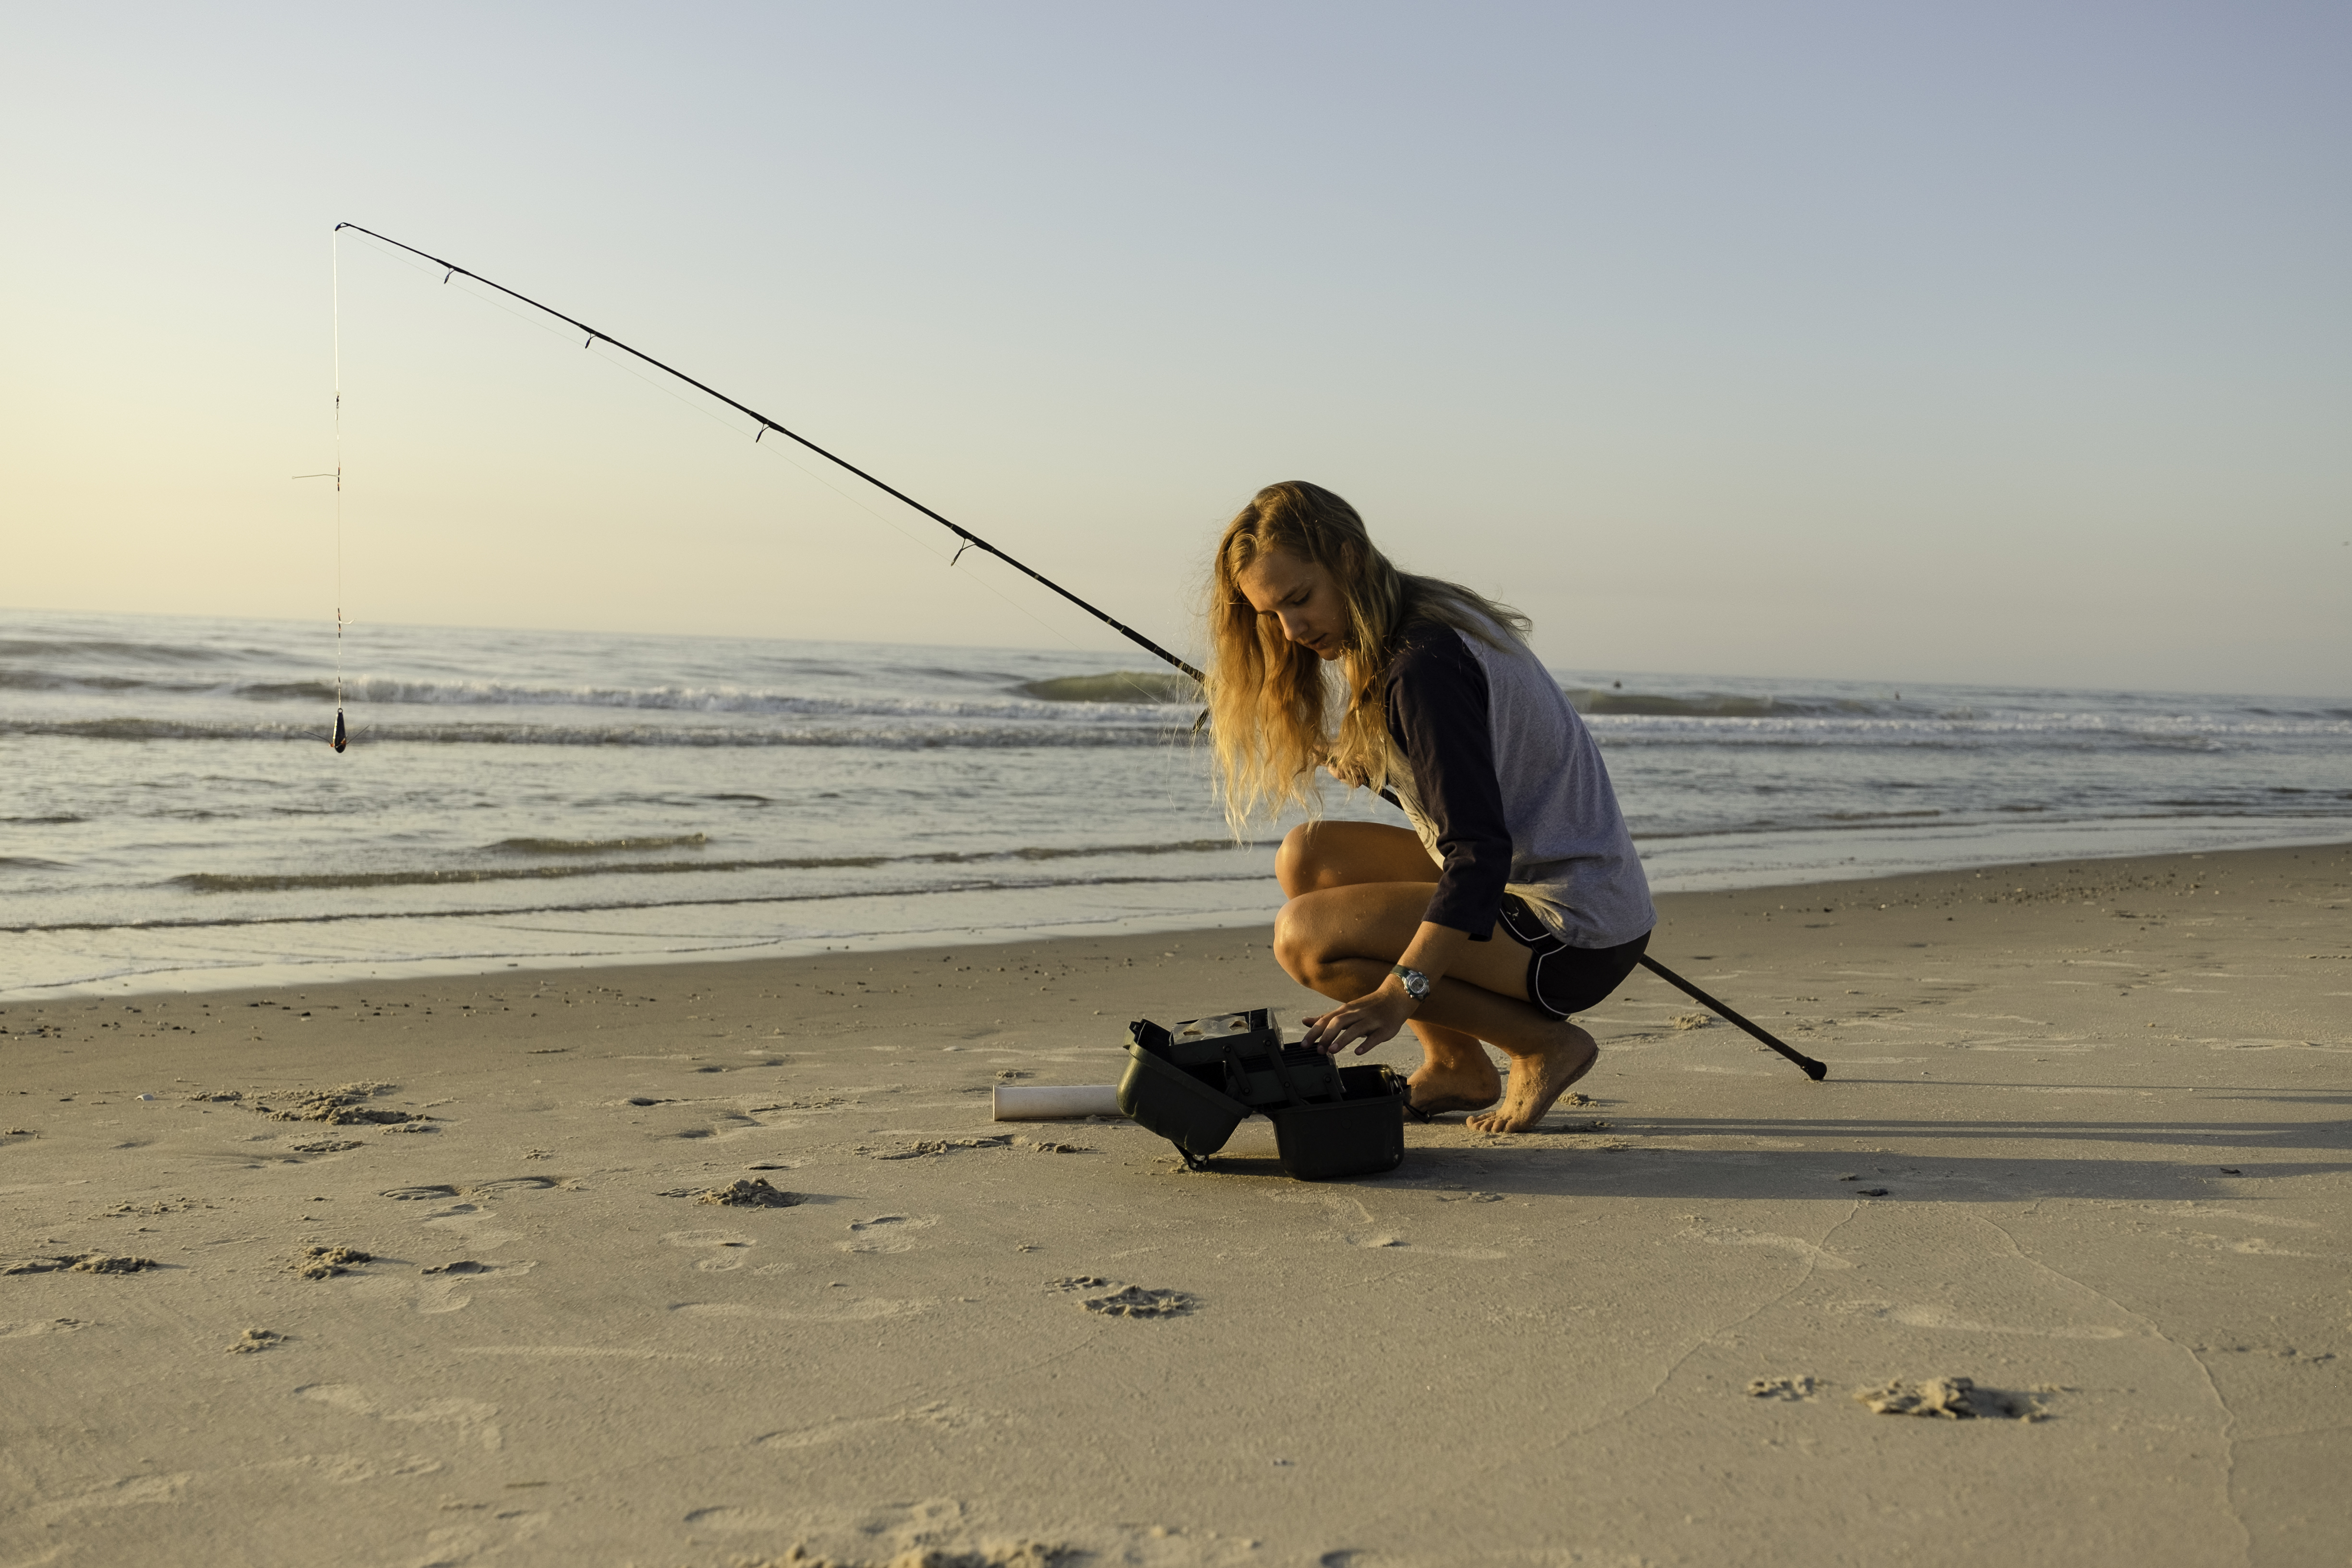 Fishing in Virginia Beach - Fishing Types, Fishing Rules and Information